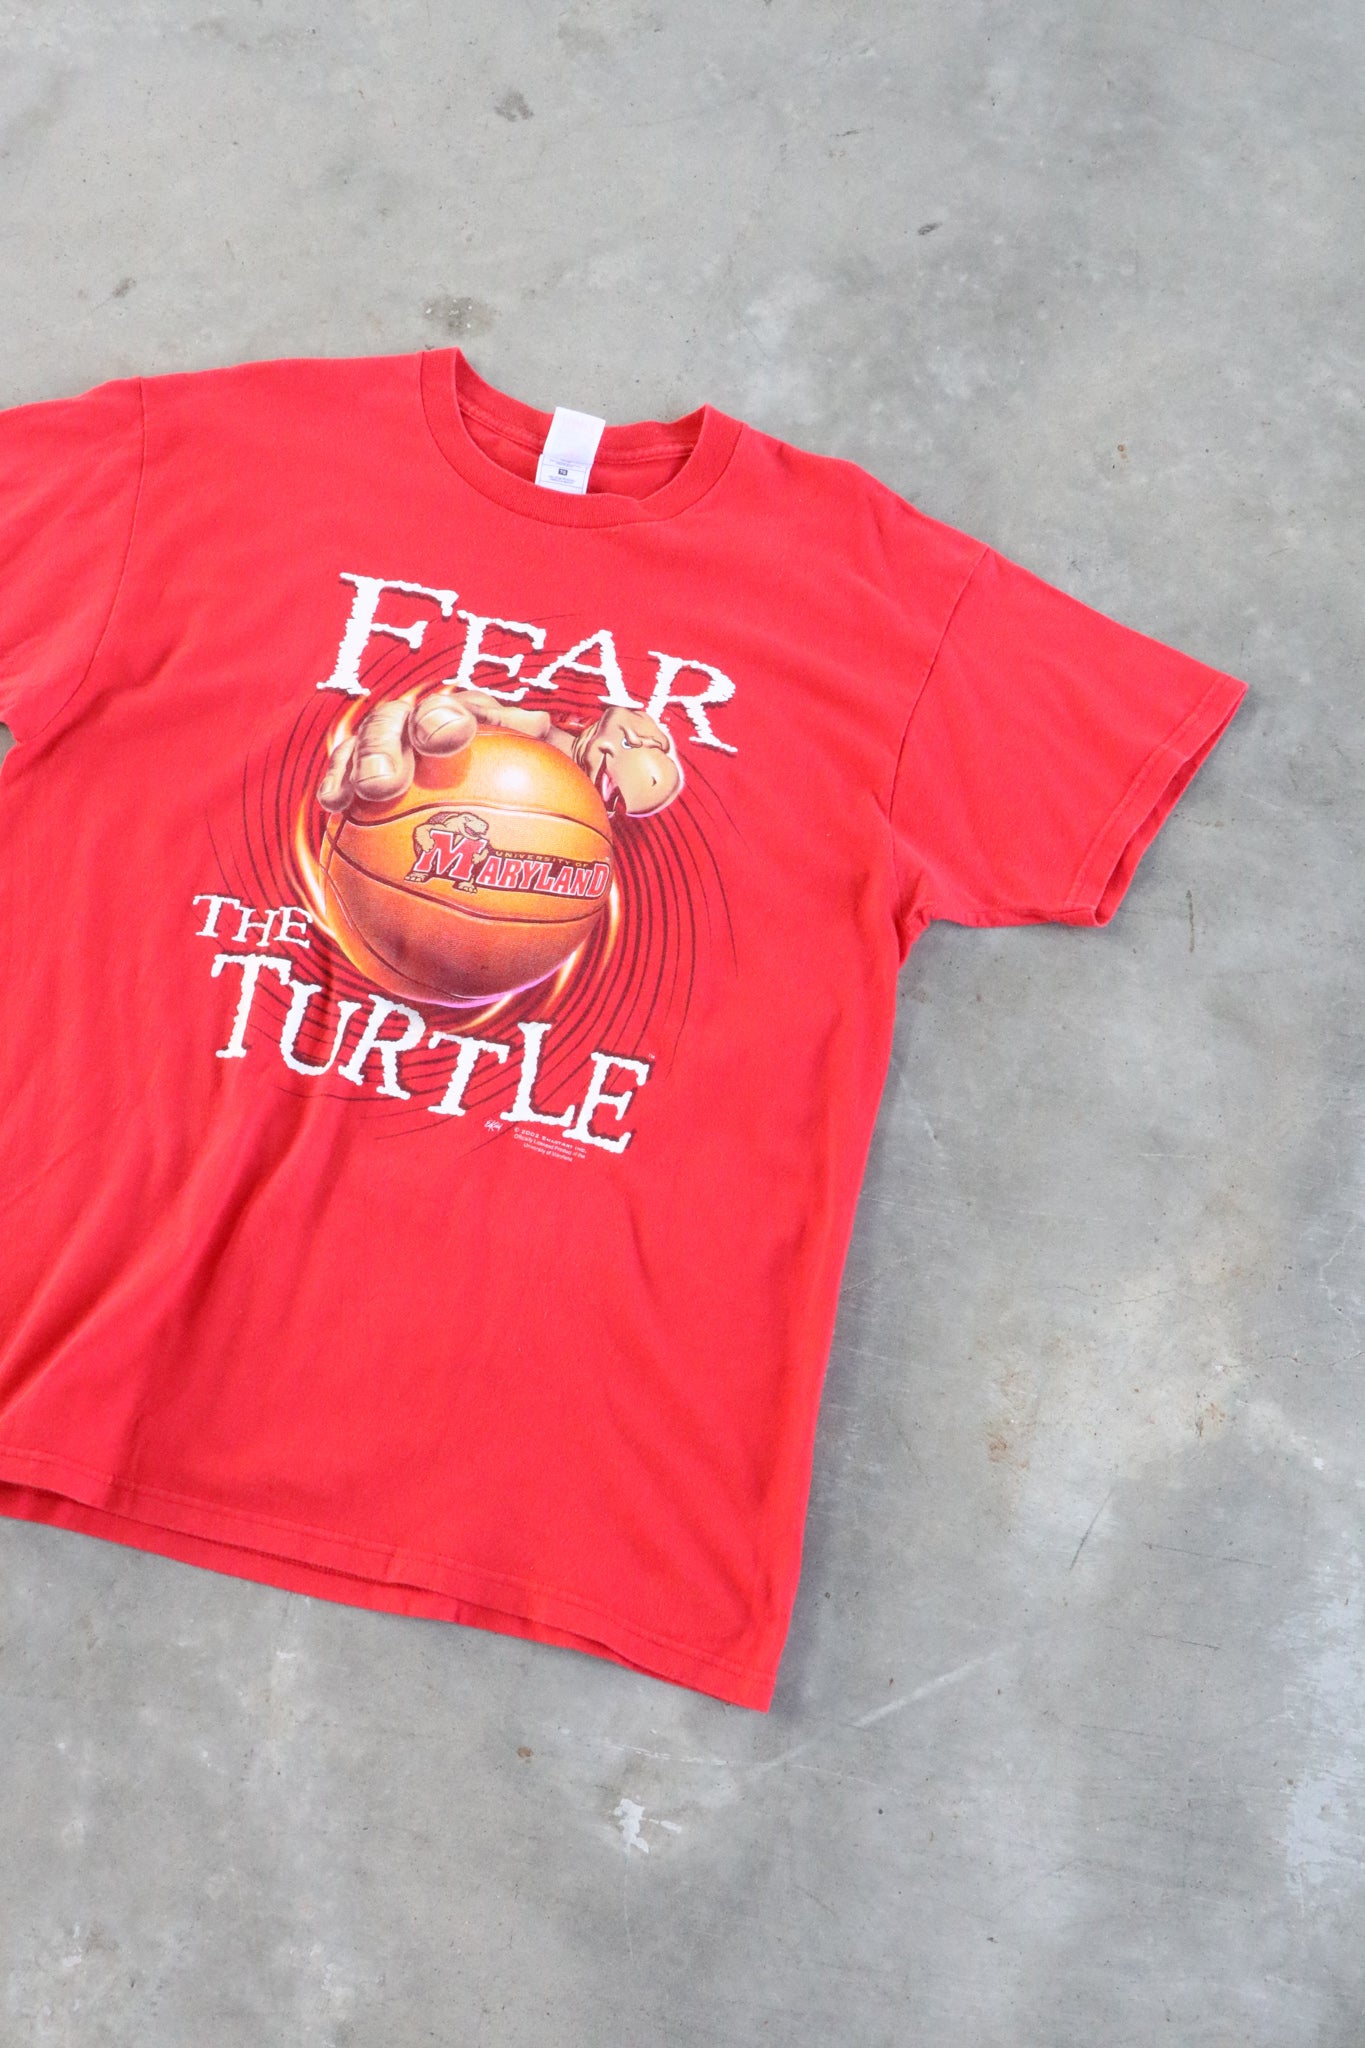 Vintage Maryland Fear the Turtle Tee XL